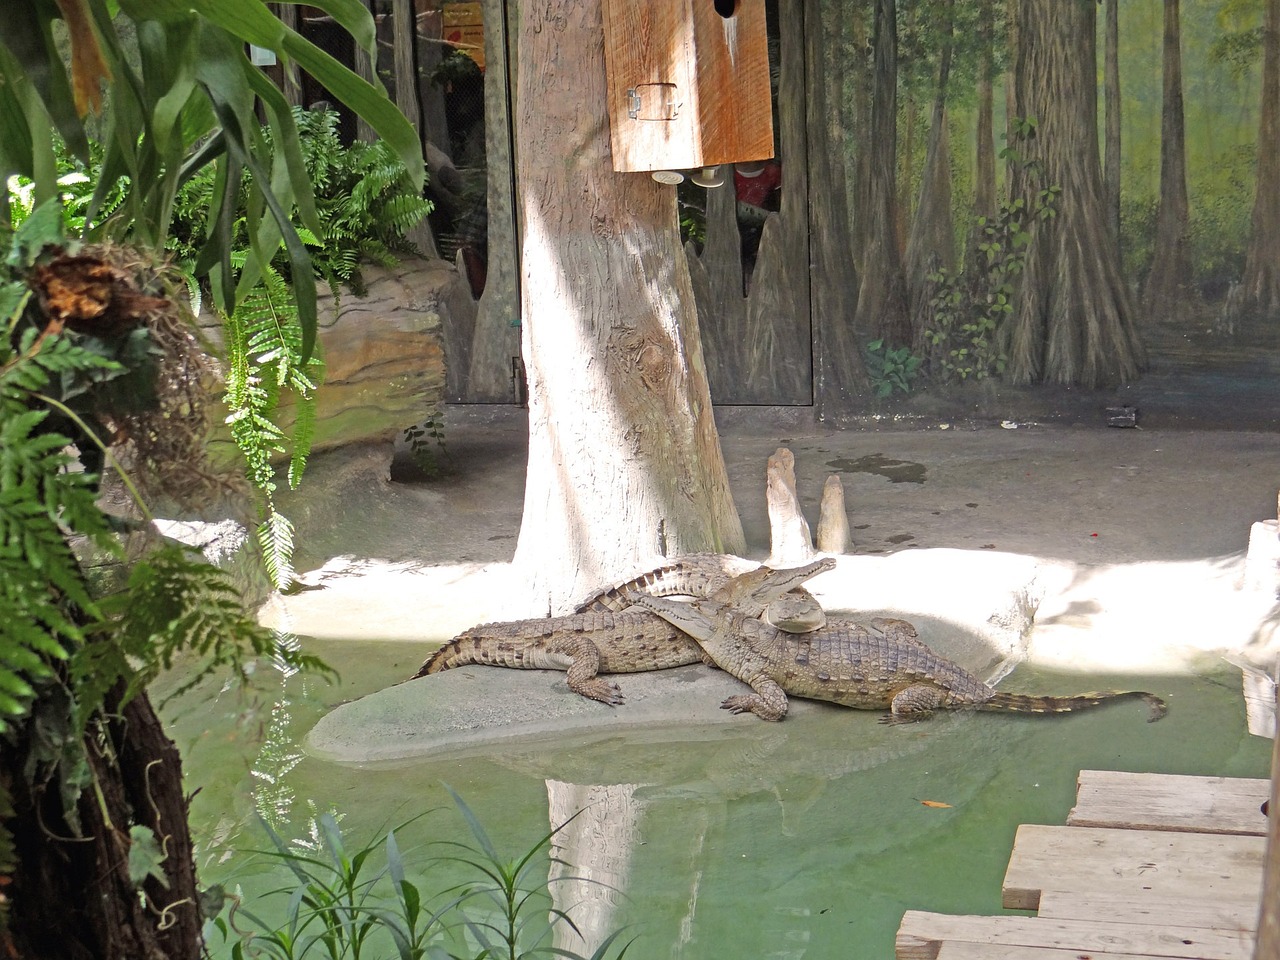 a crocodile laying on the ground next to a birdhouse, by Emanuel Schongut, flickr, sumatraism, adult pair of twins, next to a tropical pool, bangkok, in the zoo exhibit